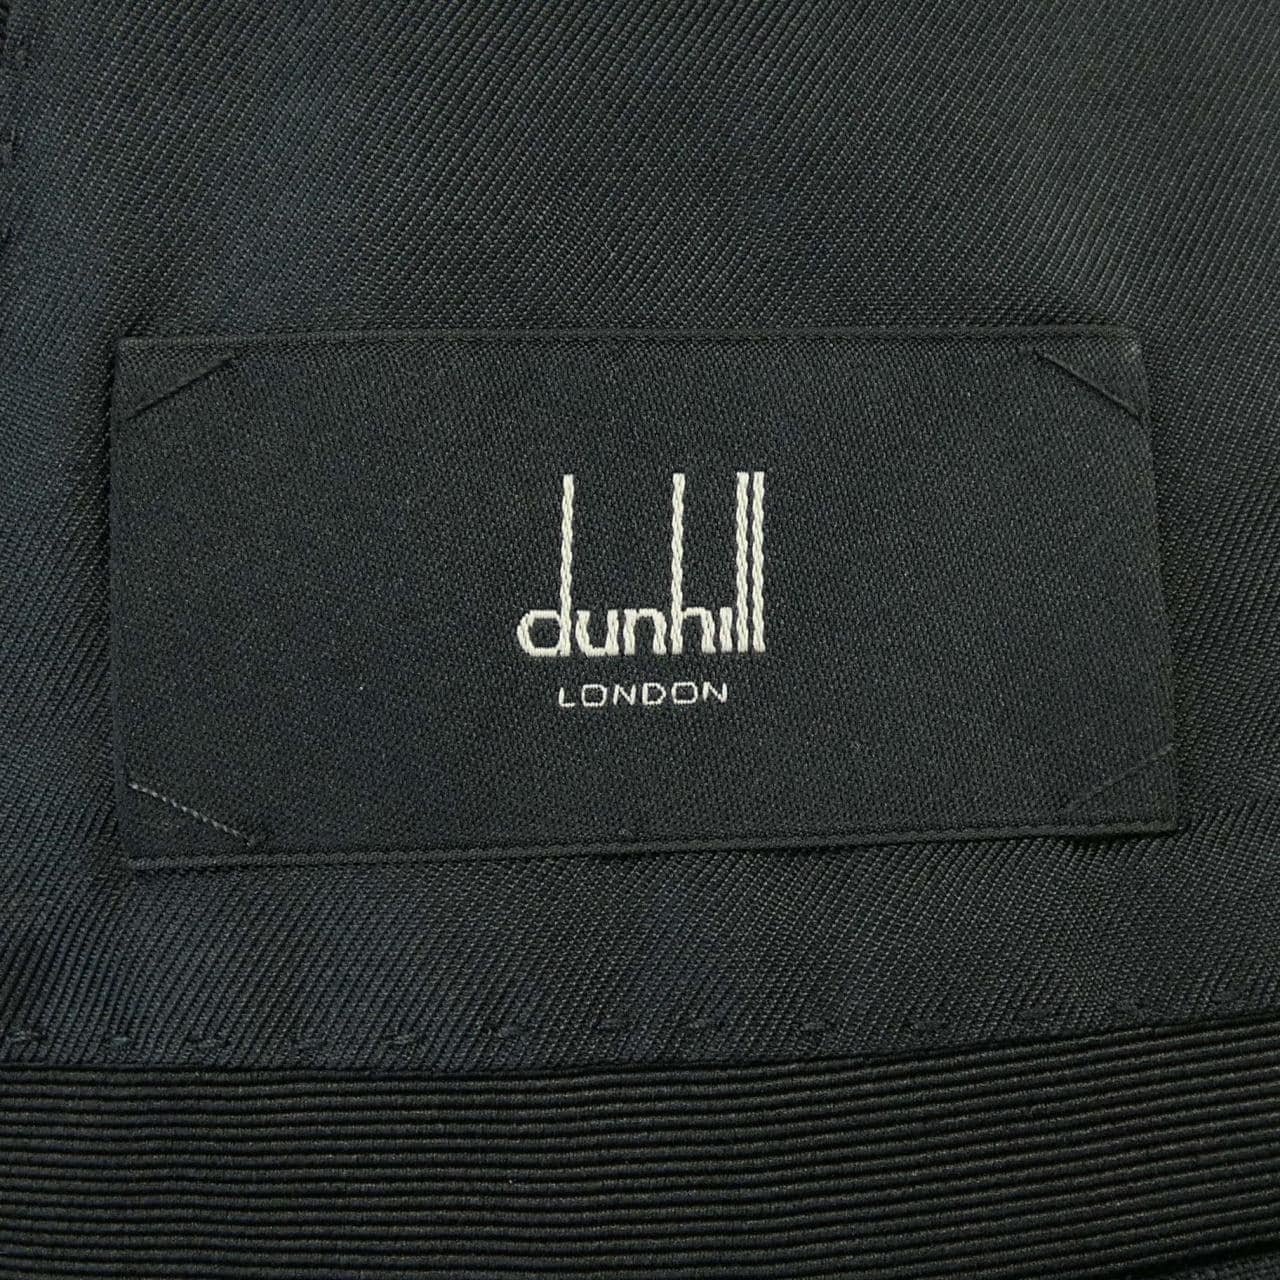 DUNHILL邓希尔夹克